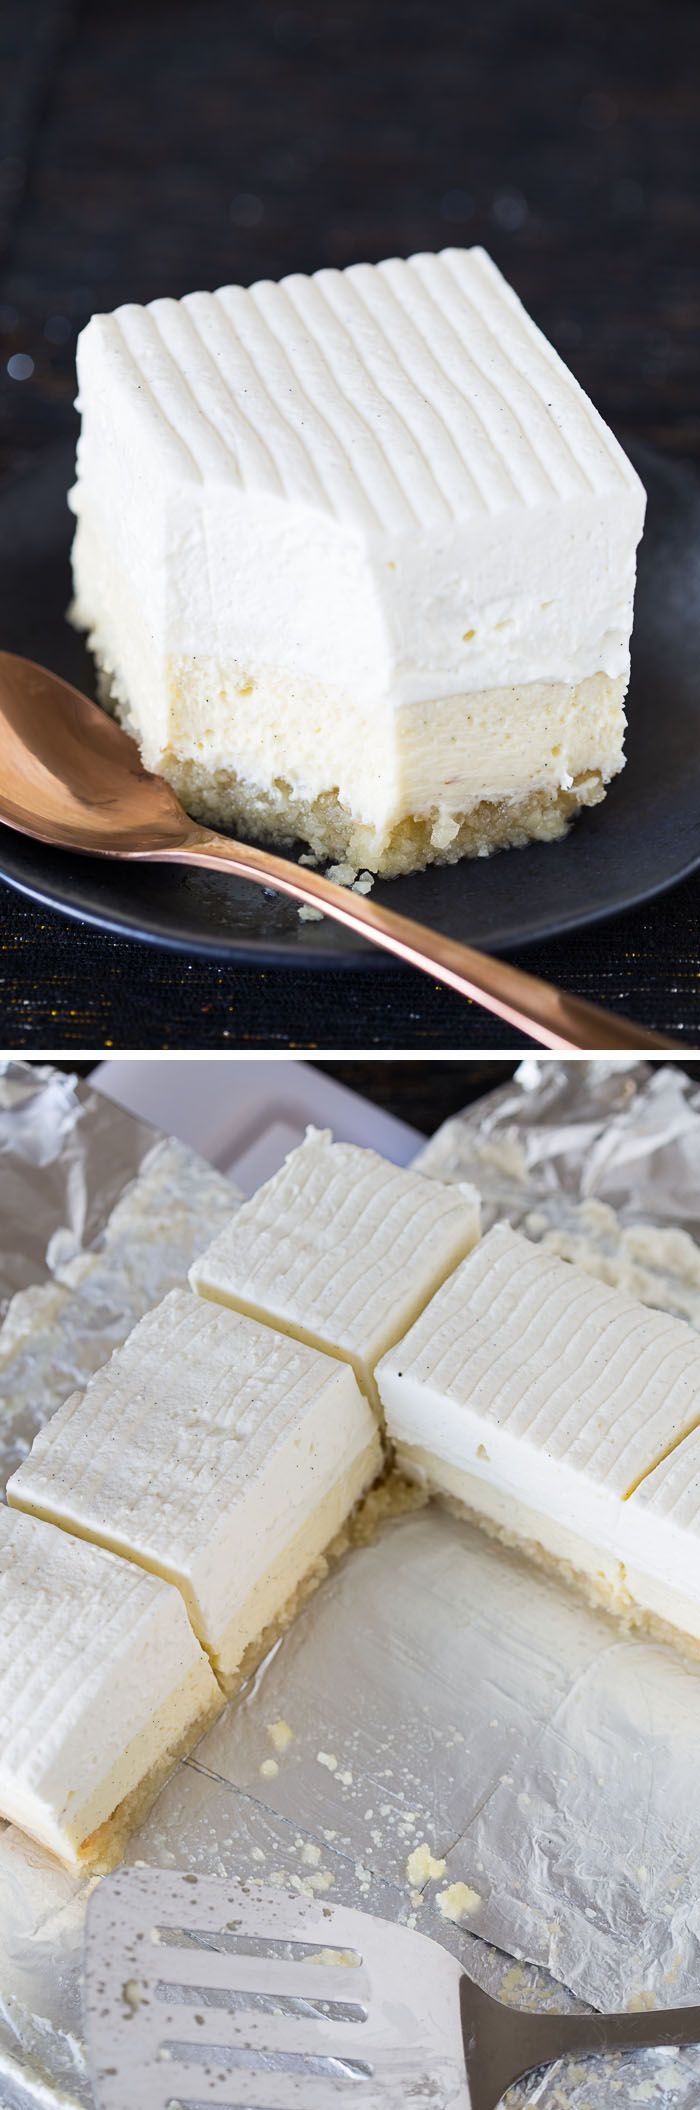 This recipe for Vanilla Bean Cheesecake bars on a buttery macadamia nut crust is easy, decadent, and delicious! A giant, beautiful